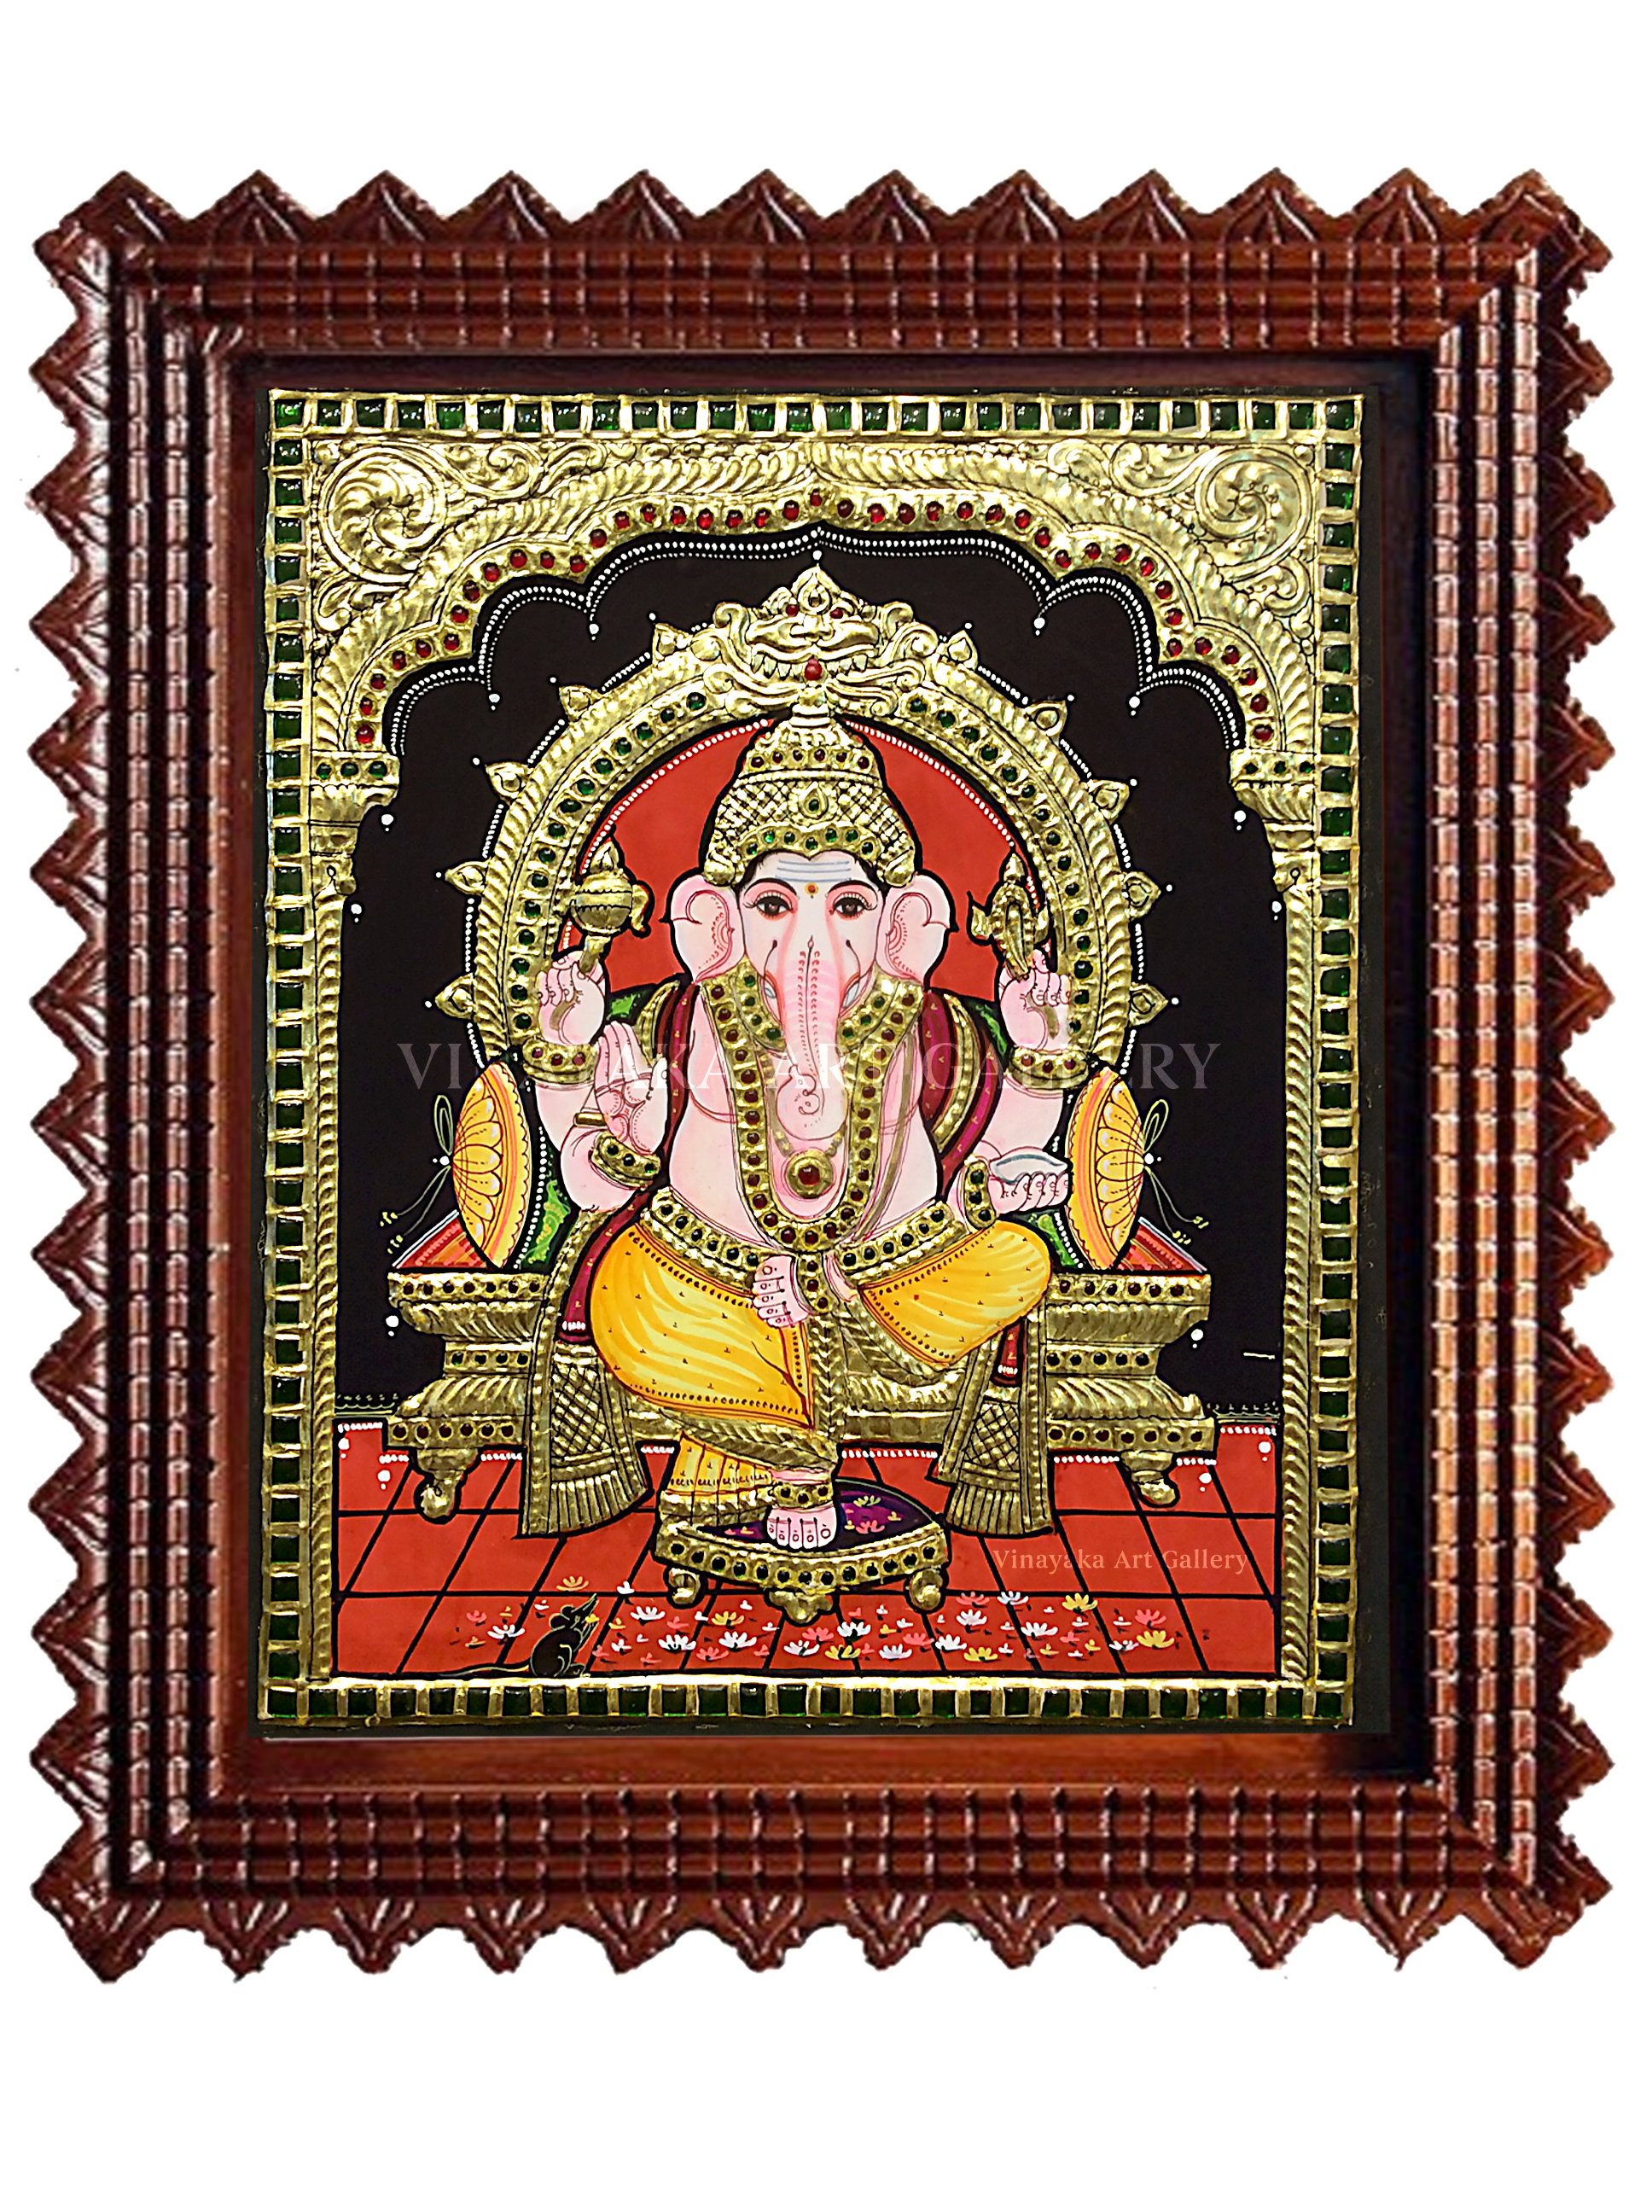 Ganesha | Ready to Ship | Same Day Delivery